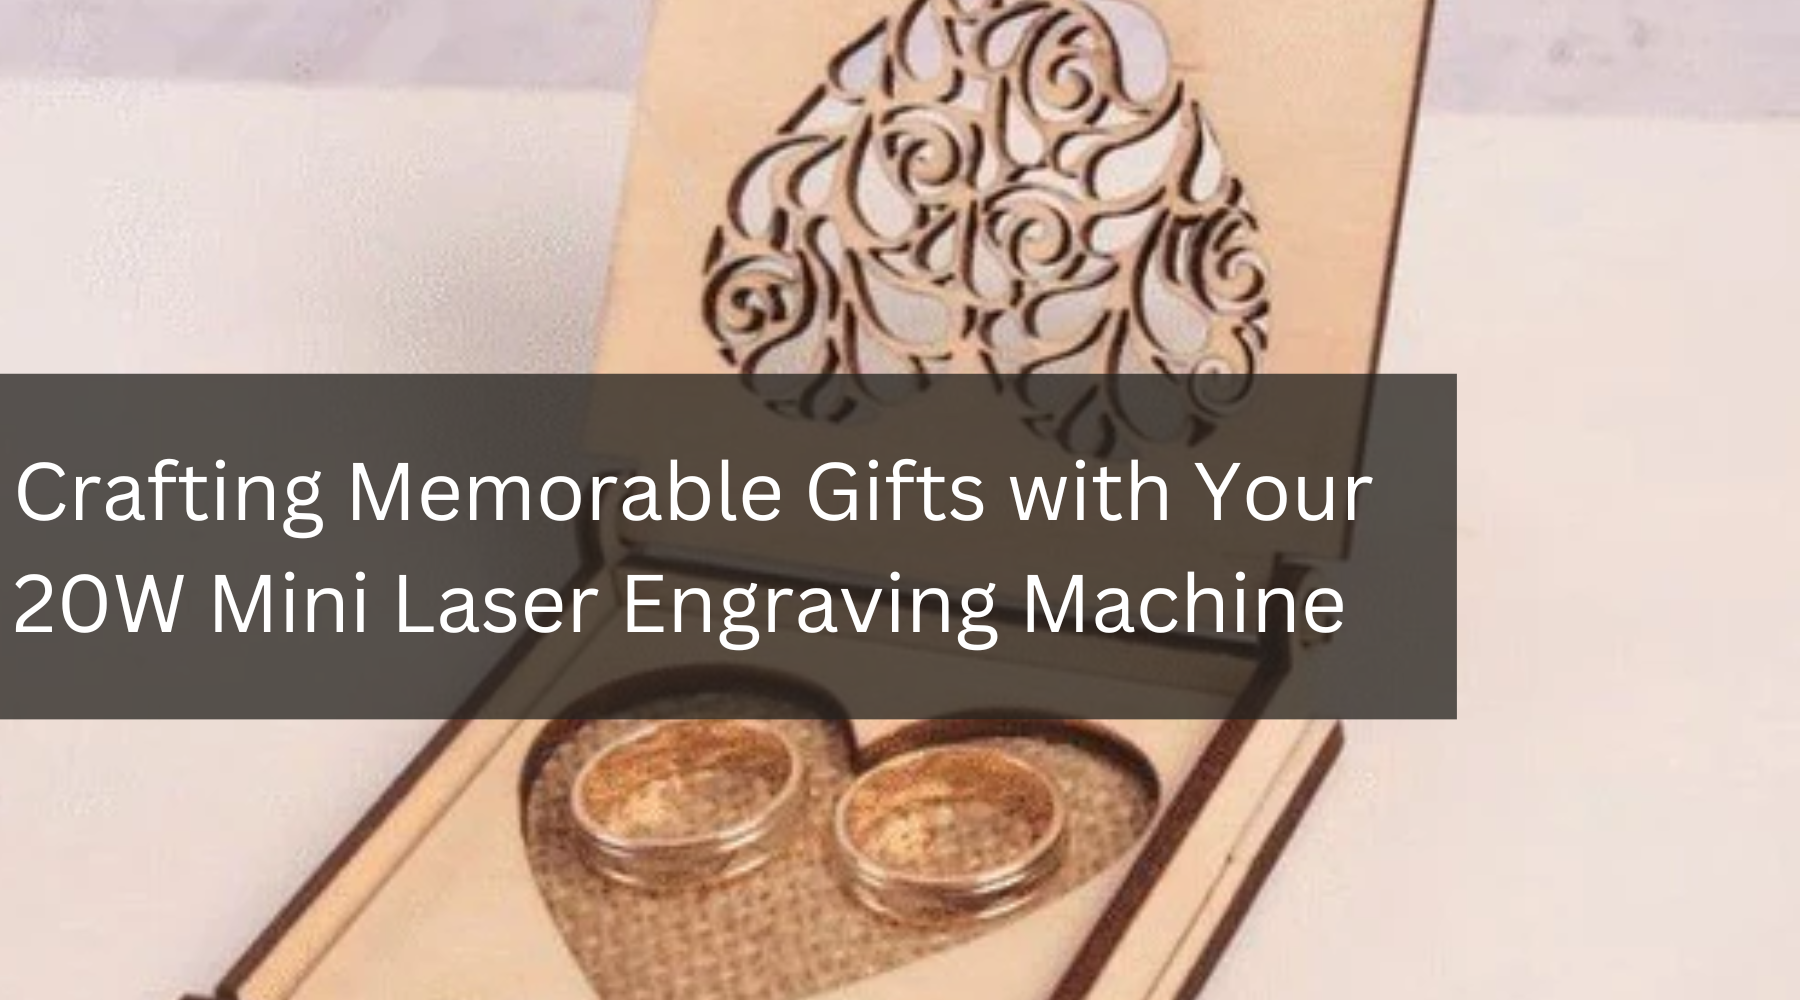 Crafting Memorable Gifts with Your 20W Mini Laser Engraving Machine